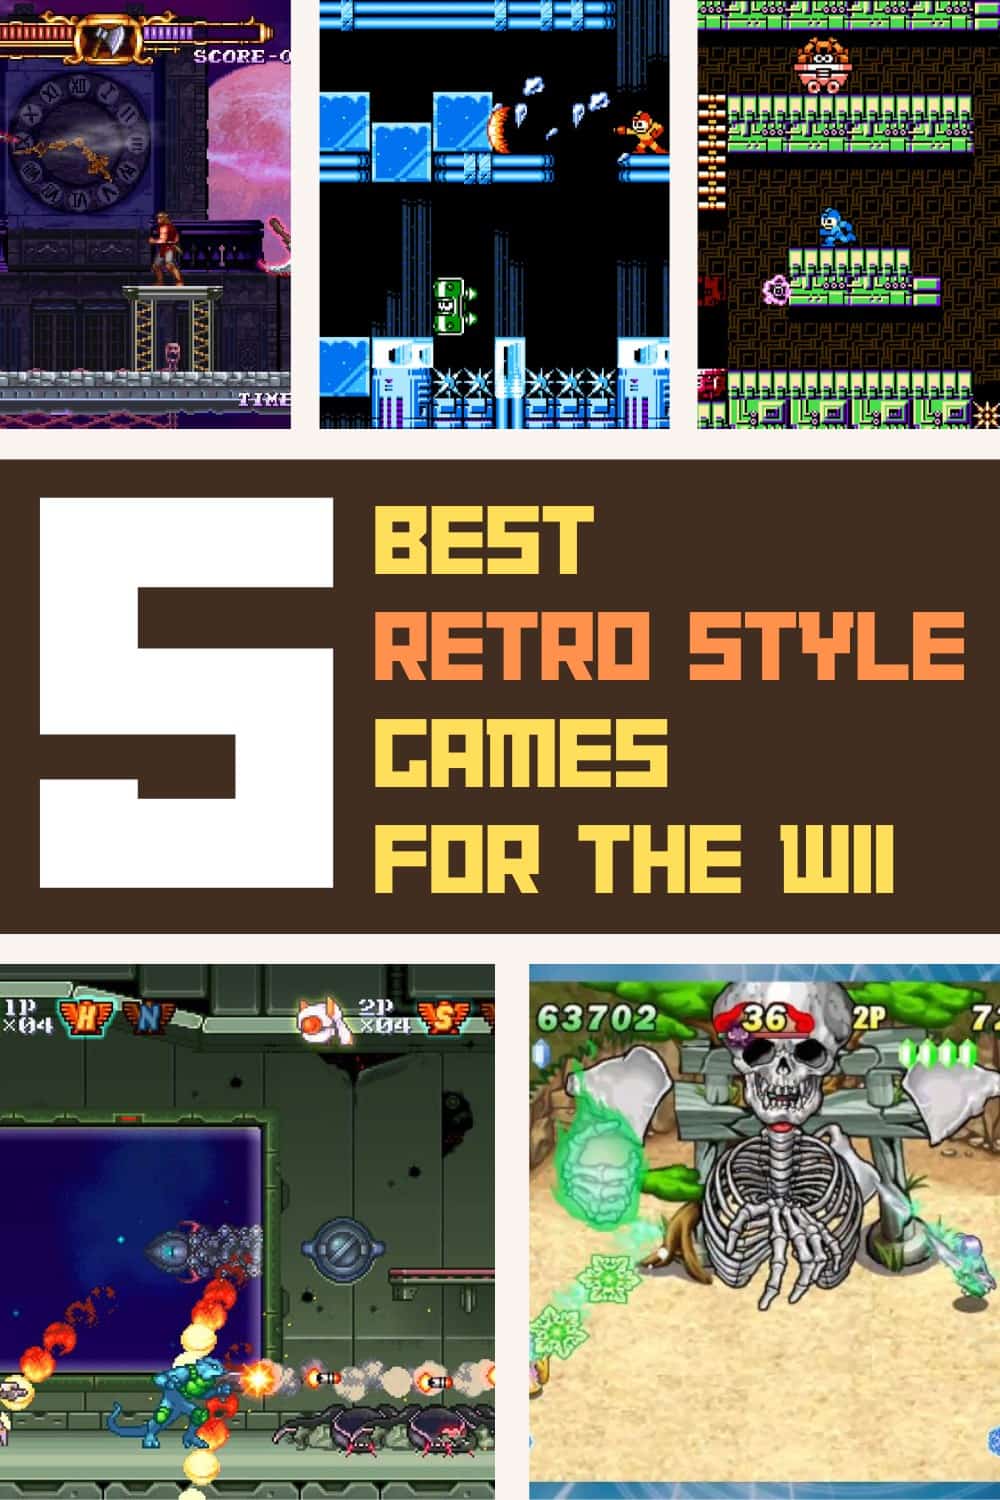 What are the best retro style Wii games?